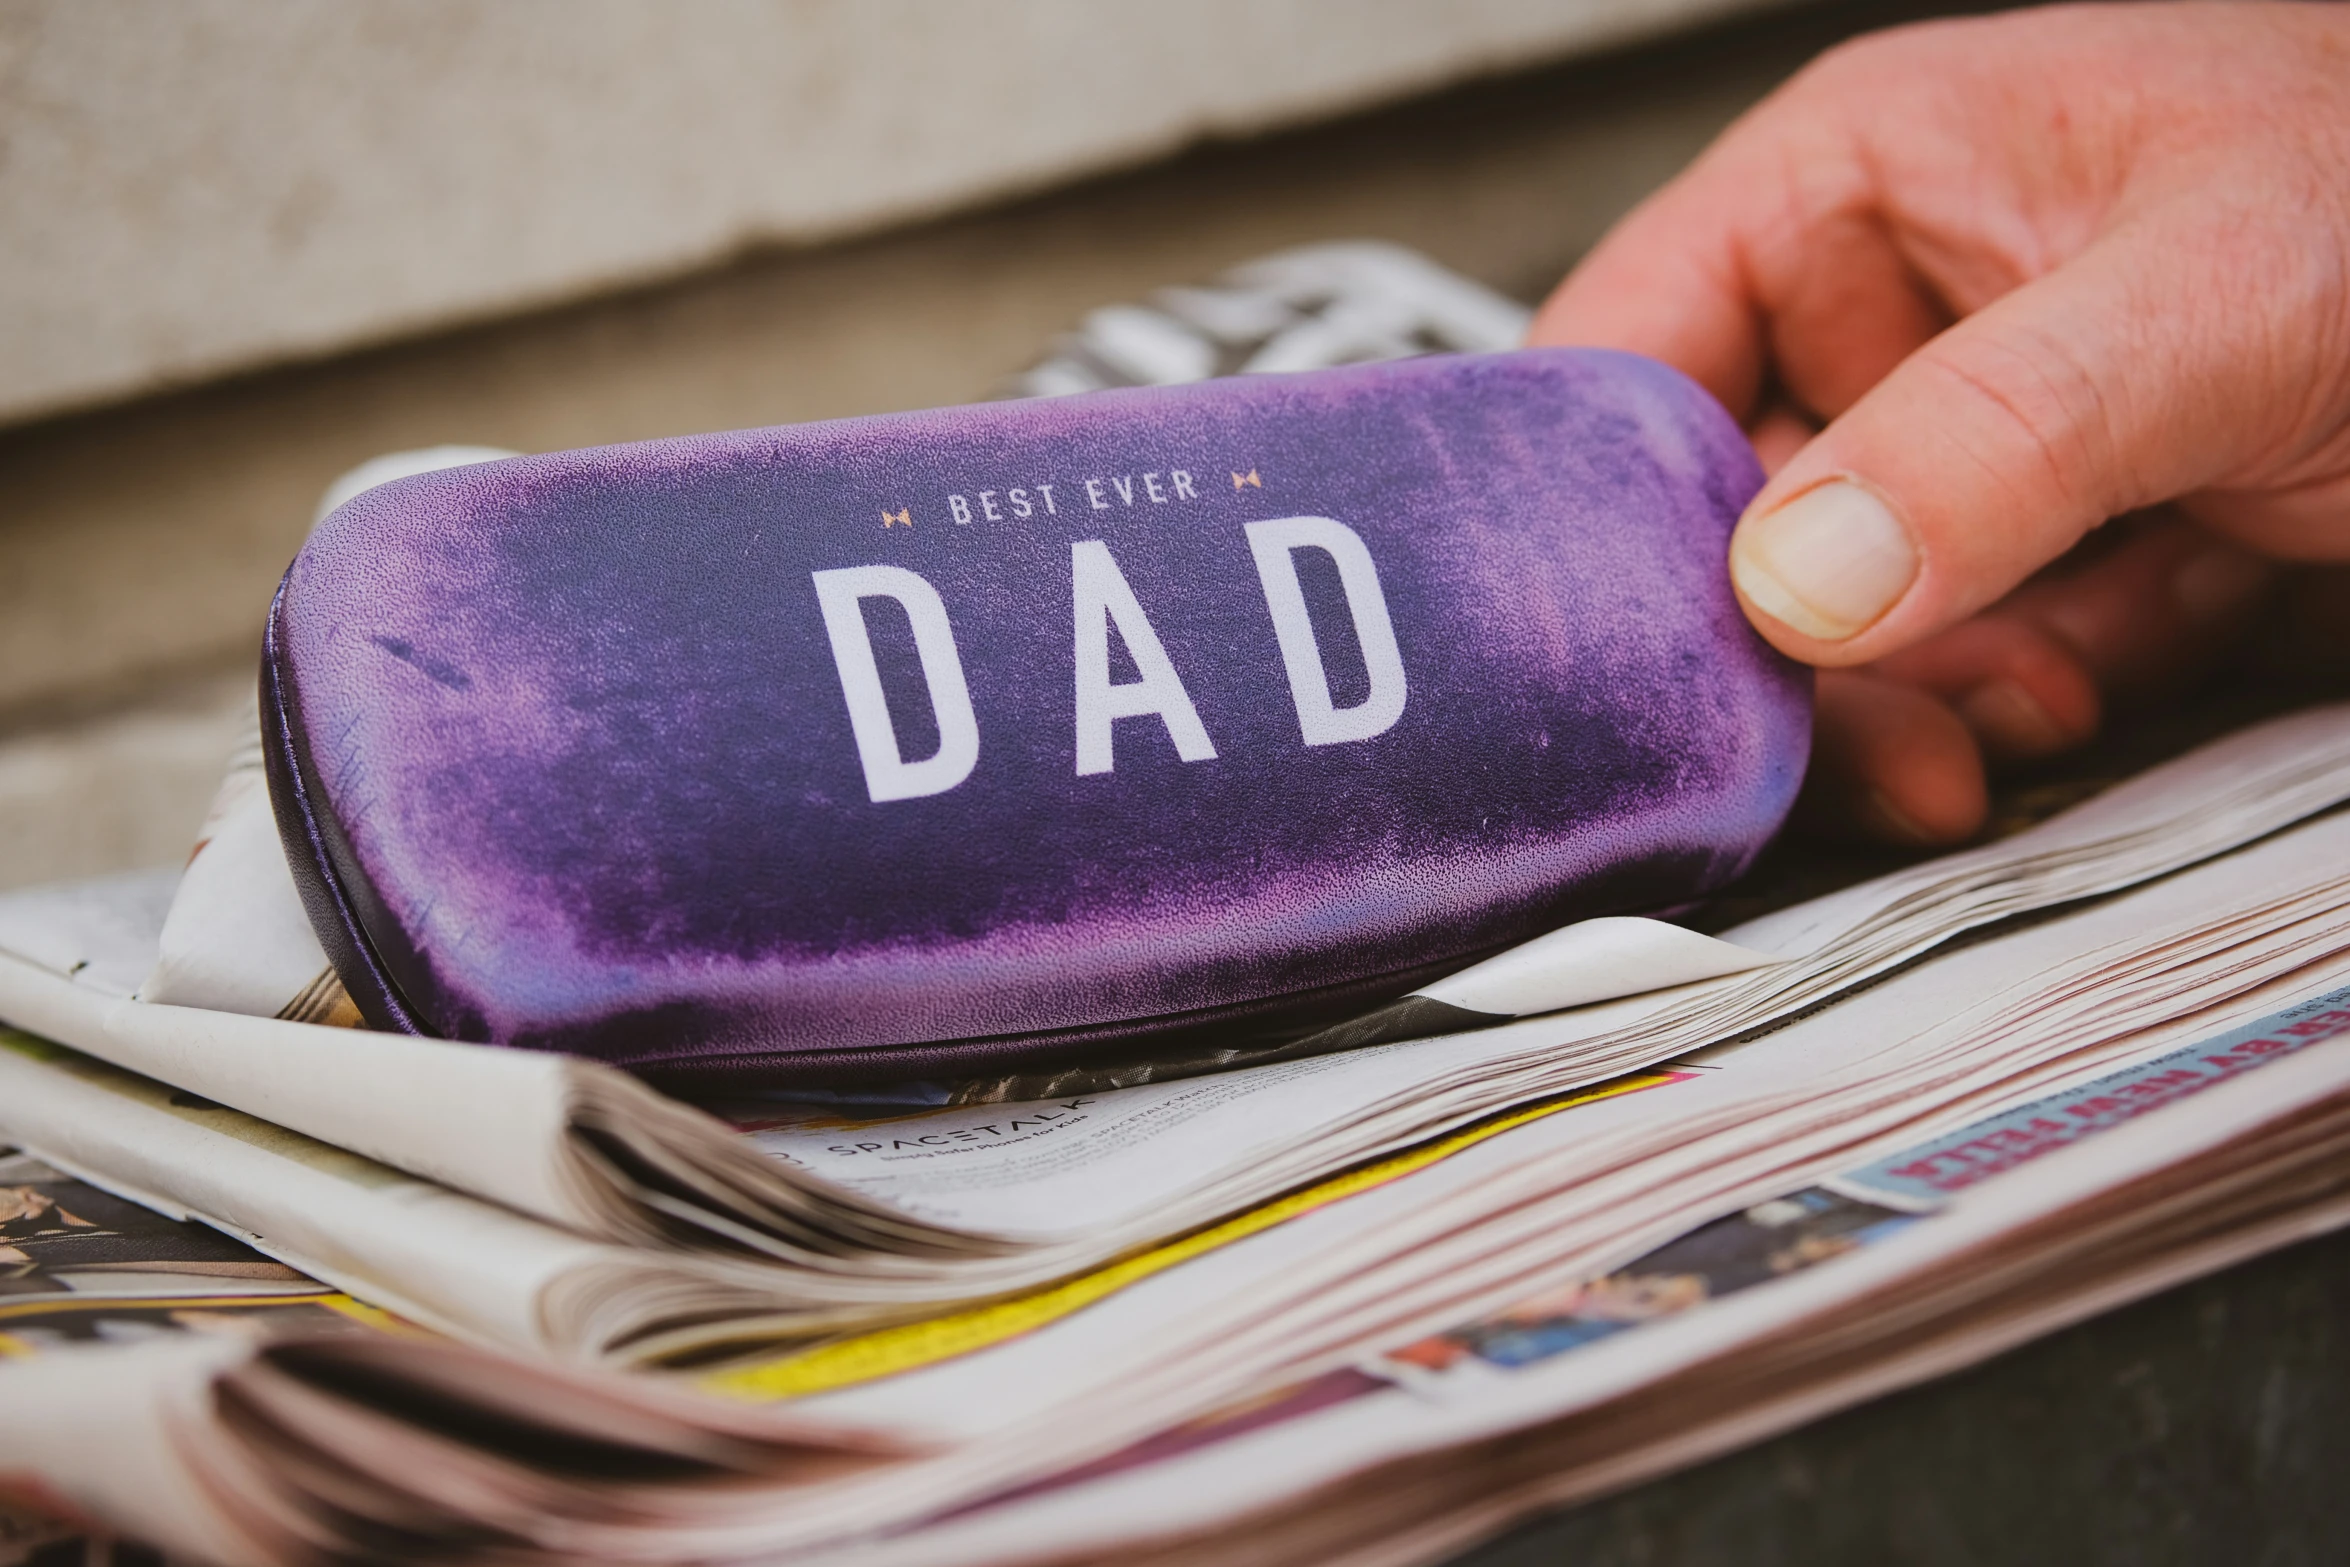 a purple travel case with white letters and some newspaper